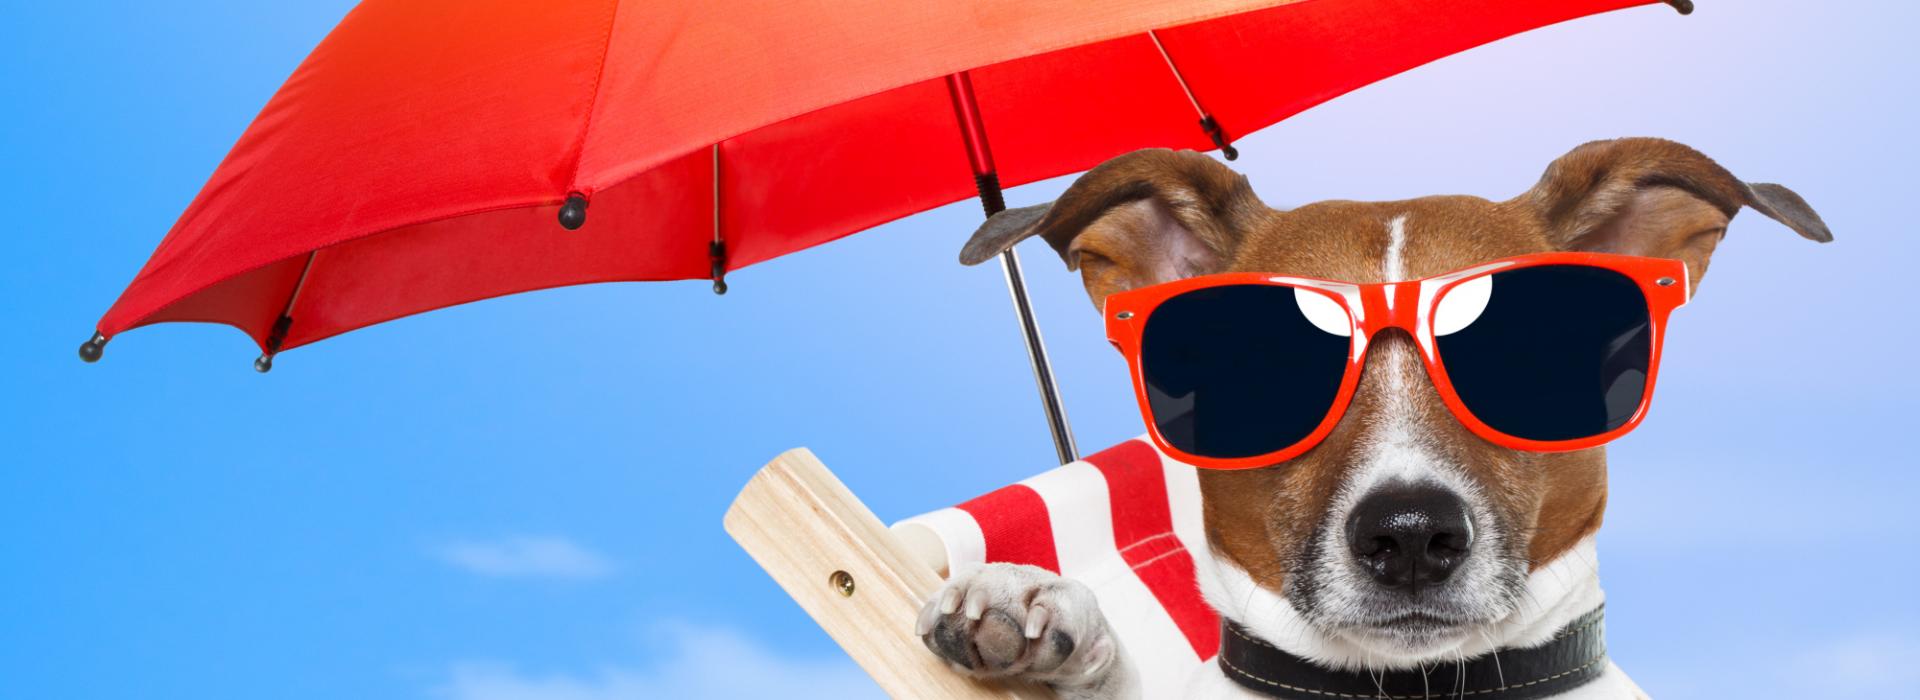 Summer under the beach umbrella with your pet